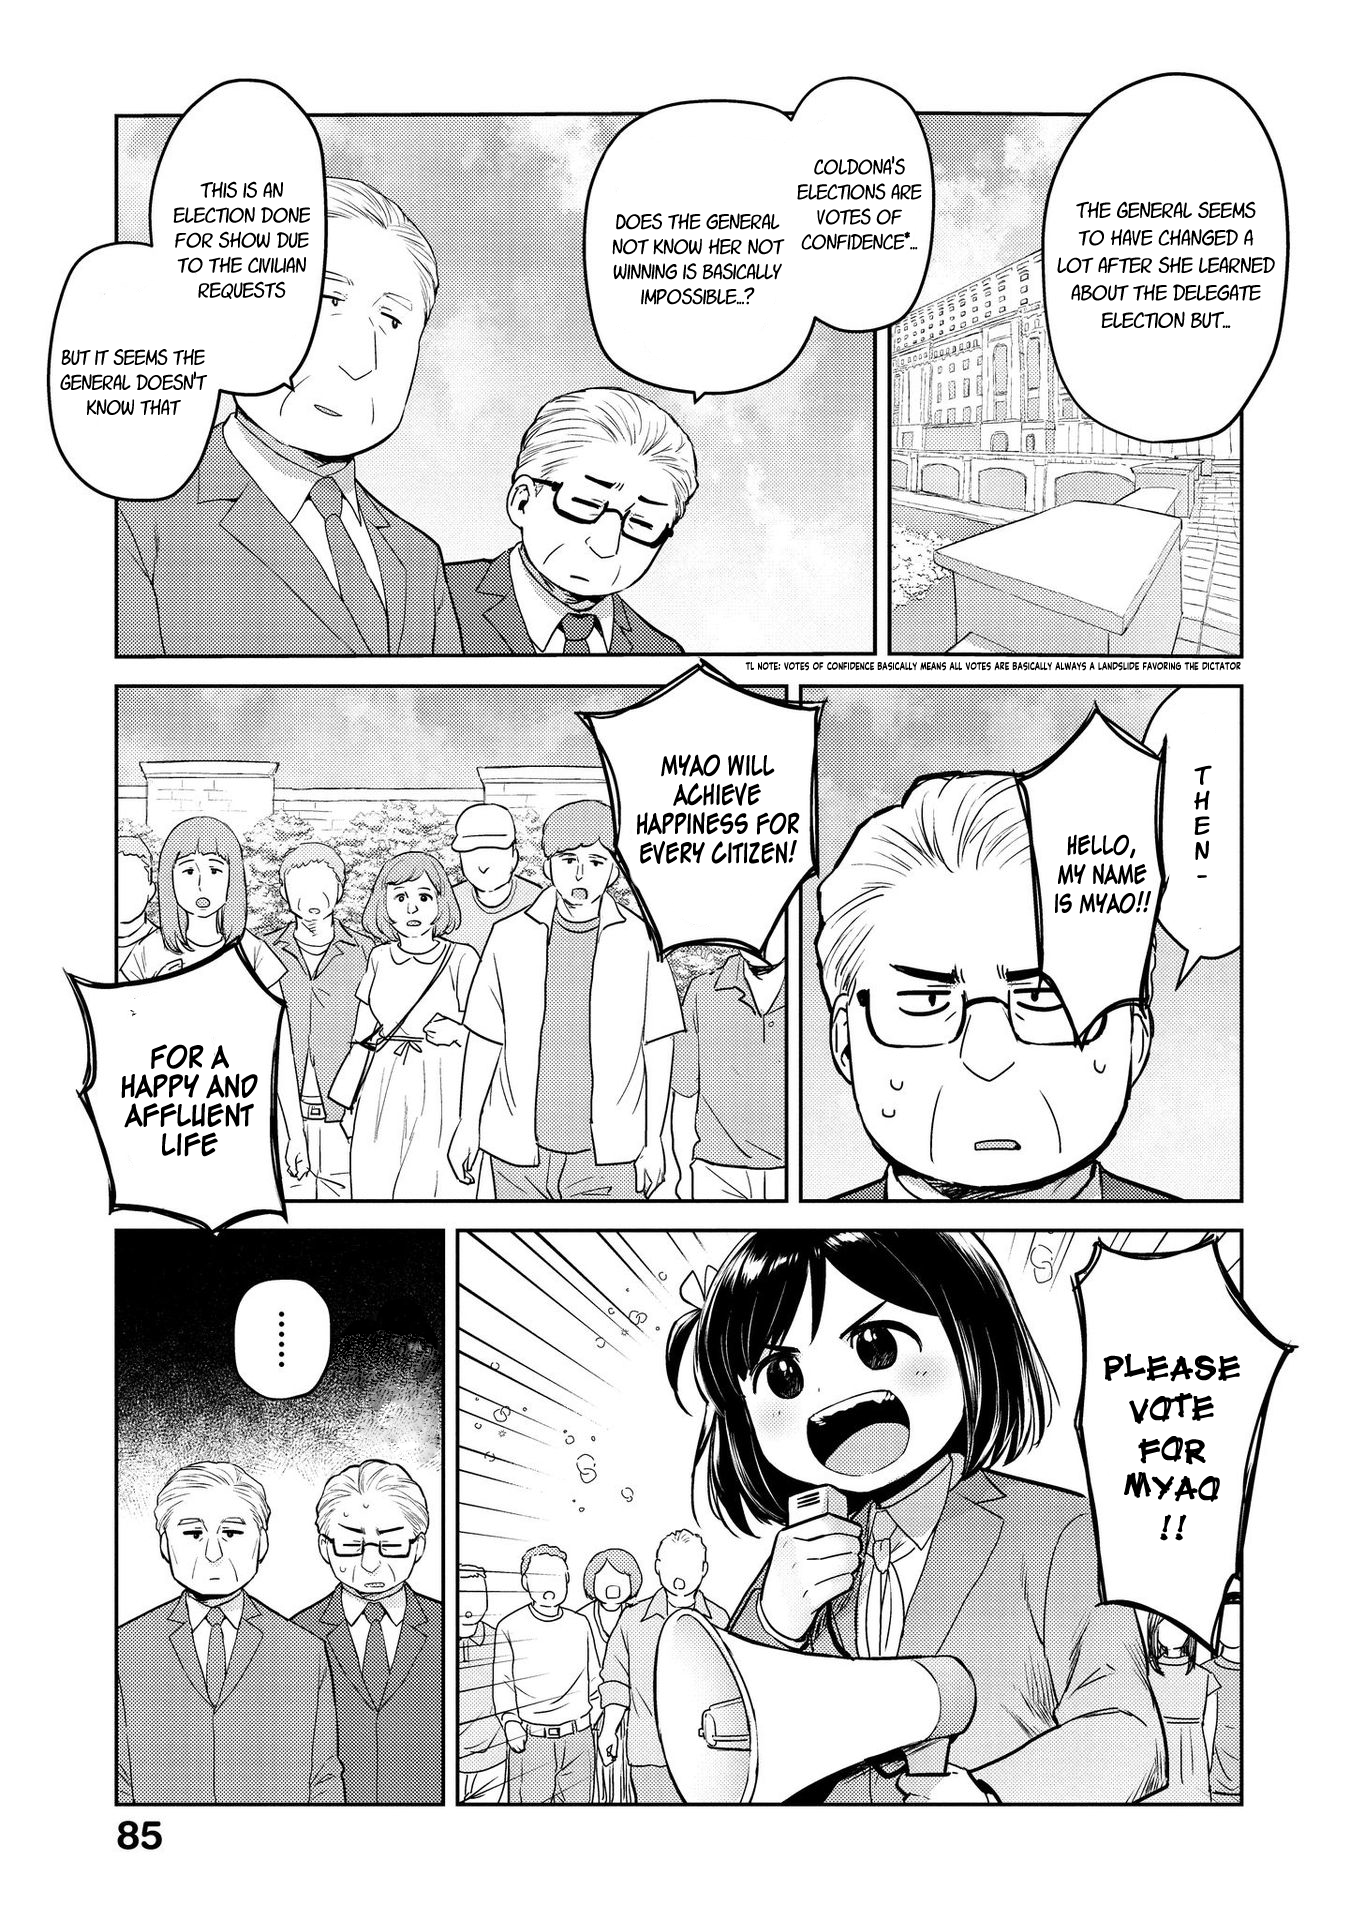 Oh, Our General Myao - Page 3